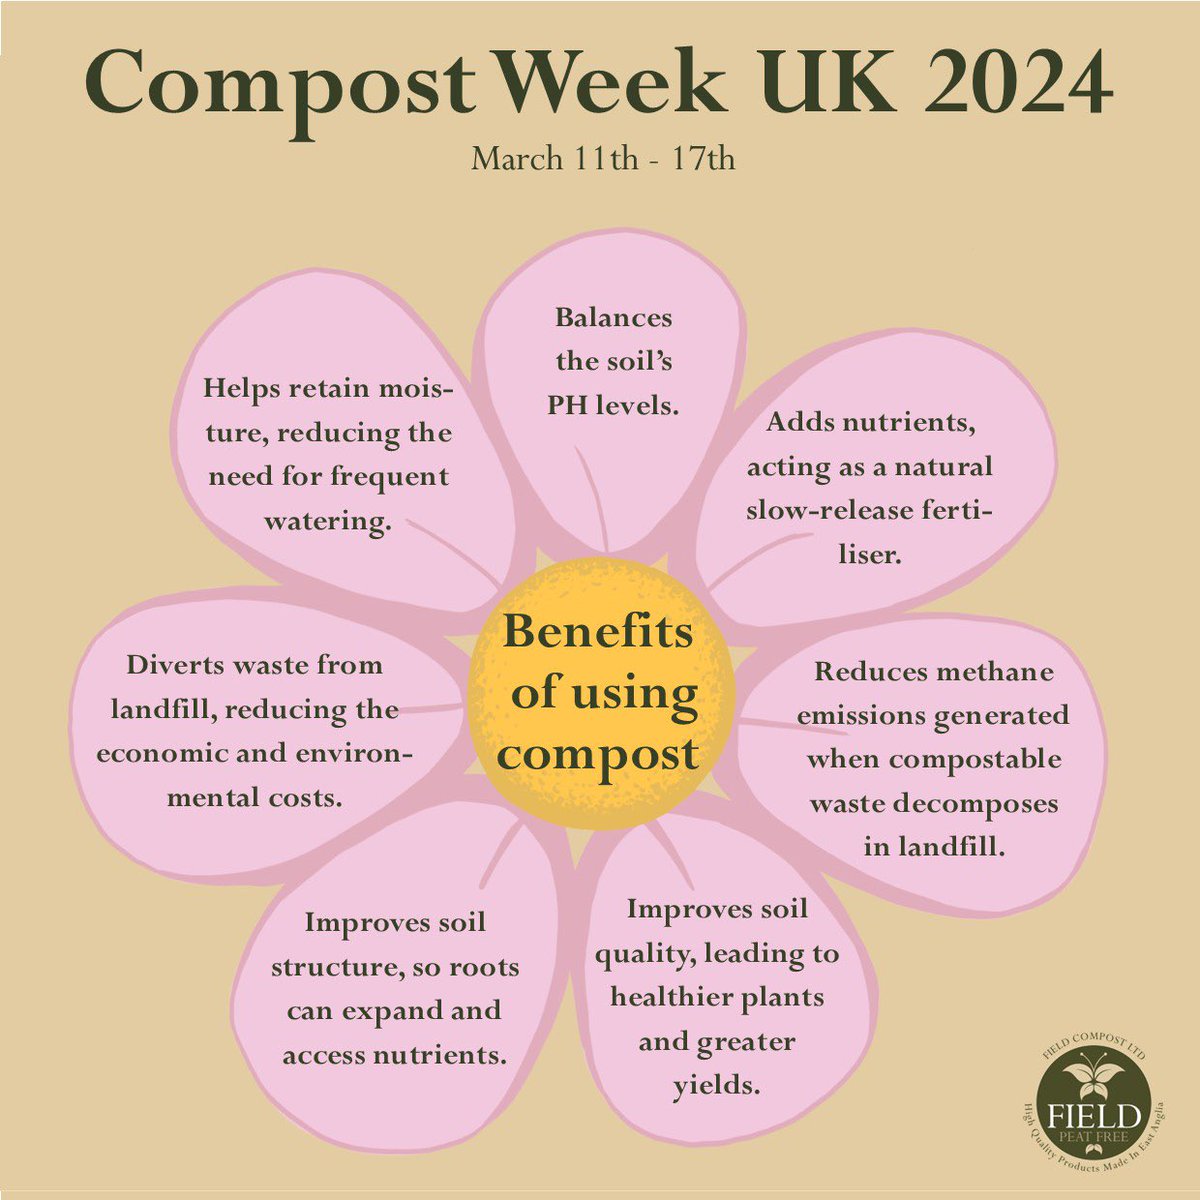 It’s #compostweekuk and we’re celebrating all the benefits of creating and using compost in our gardens! 🪴 #composteeekuk2024 #peatfree #compost #topsoil #fieldcompost